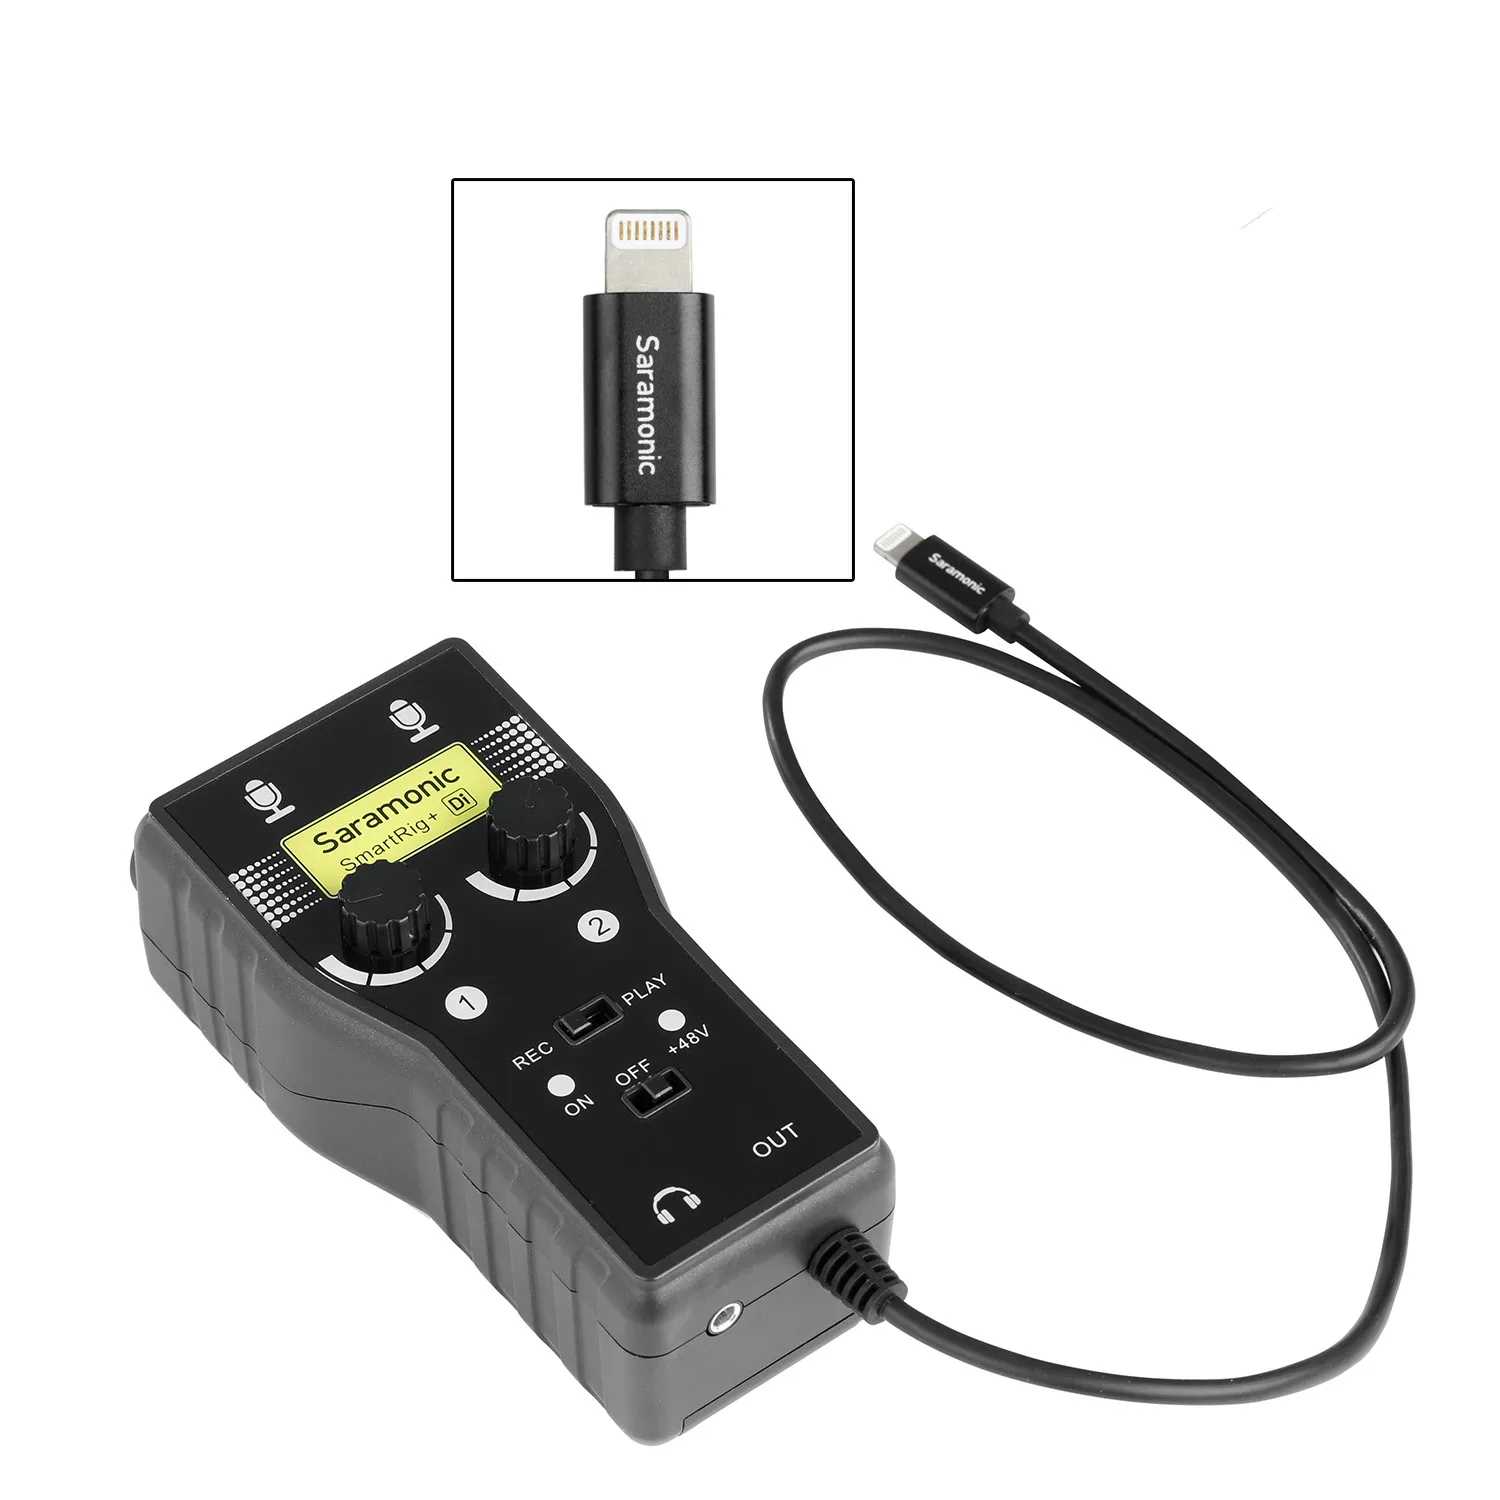 Saramonic SmartRig Series Professional Mic&Guitar Interface Preamplifier Audio Adapter Mixer for Smartphone iOS Android Device 